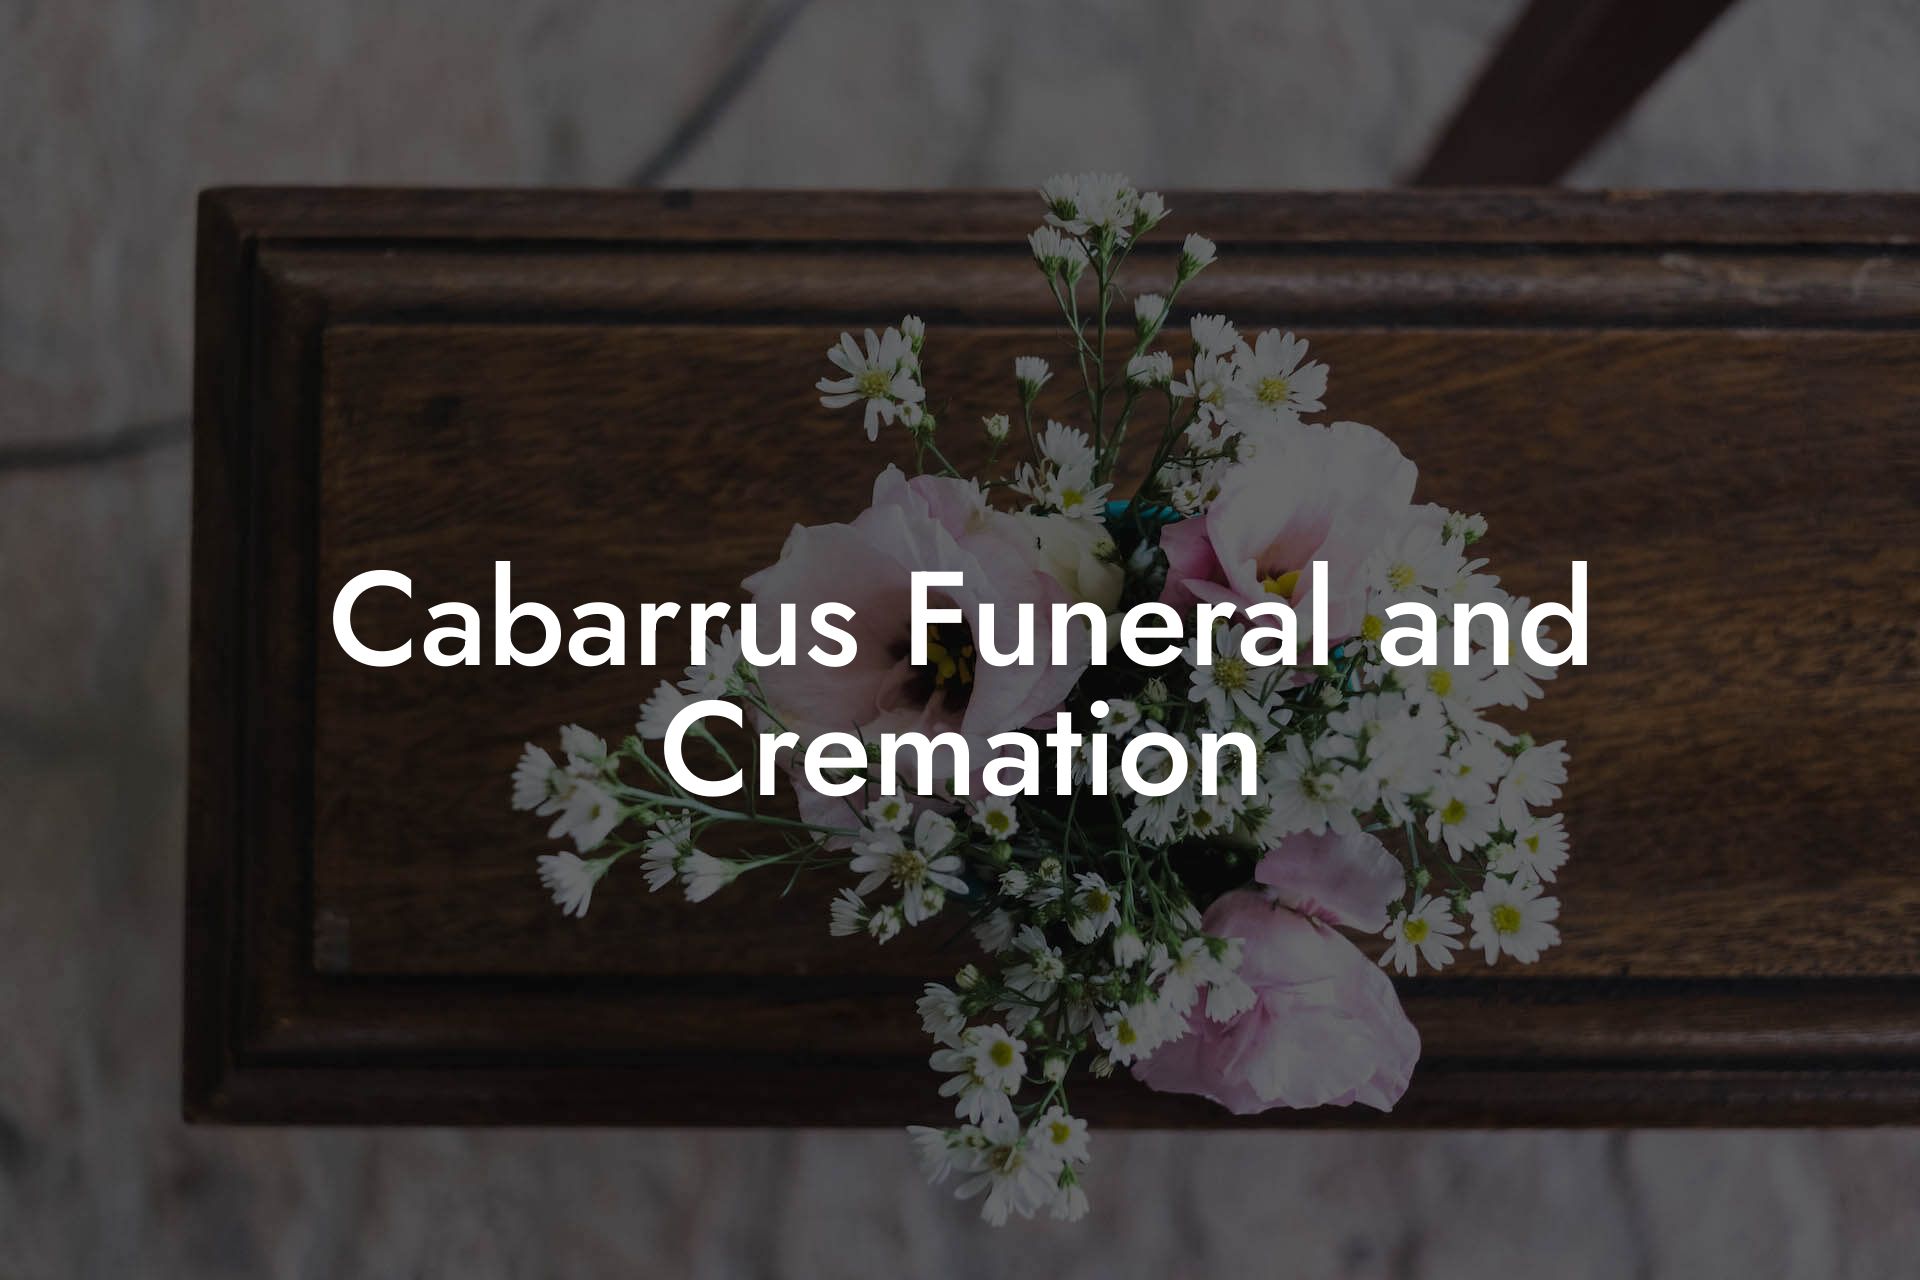 Cabarrus Funeral and Cremation